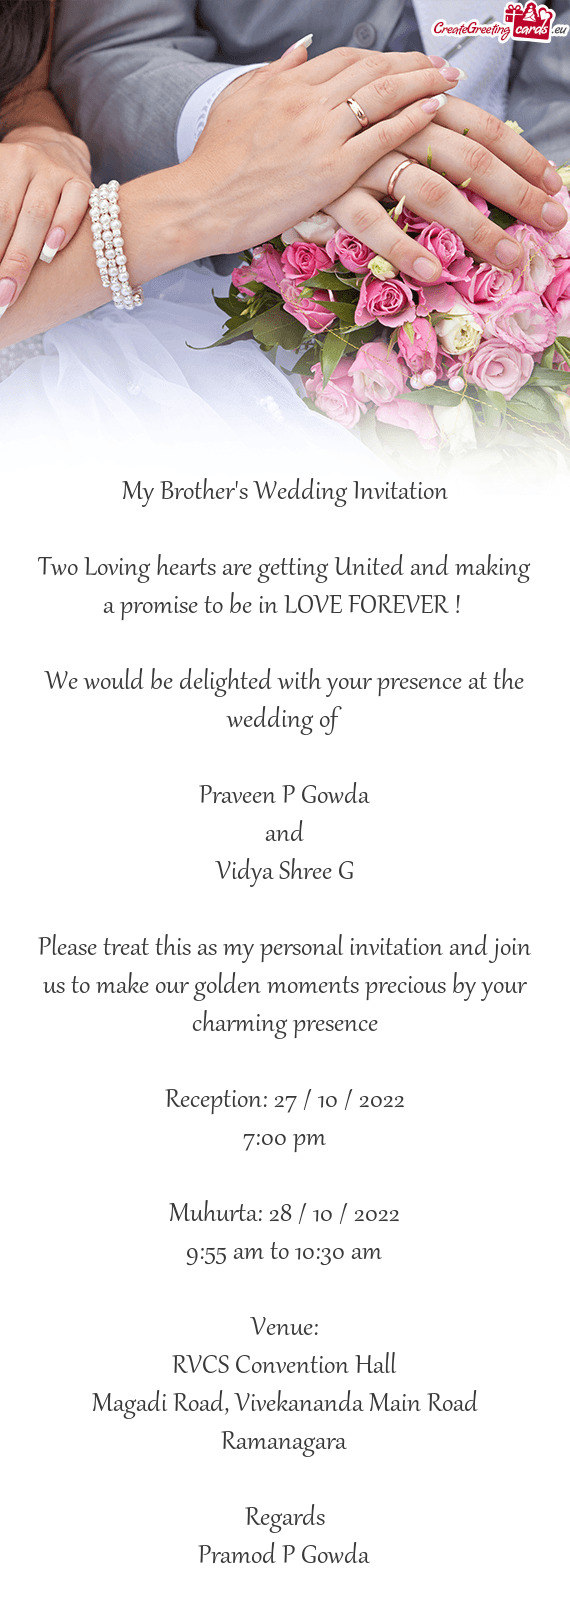 We would be delighted with your presence at the wedding of